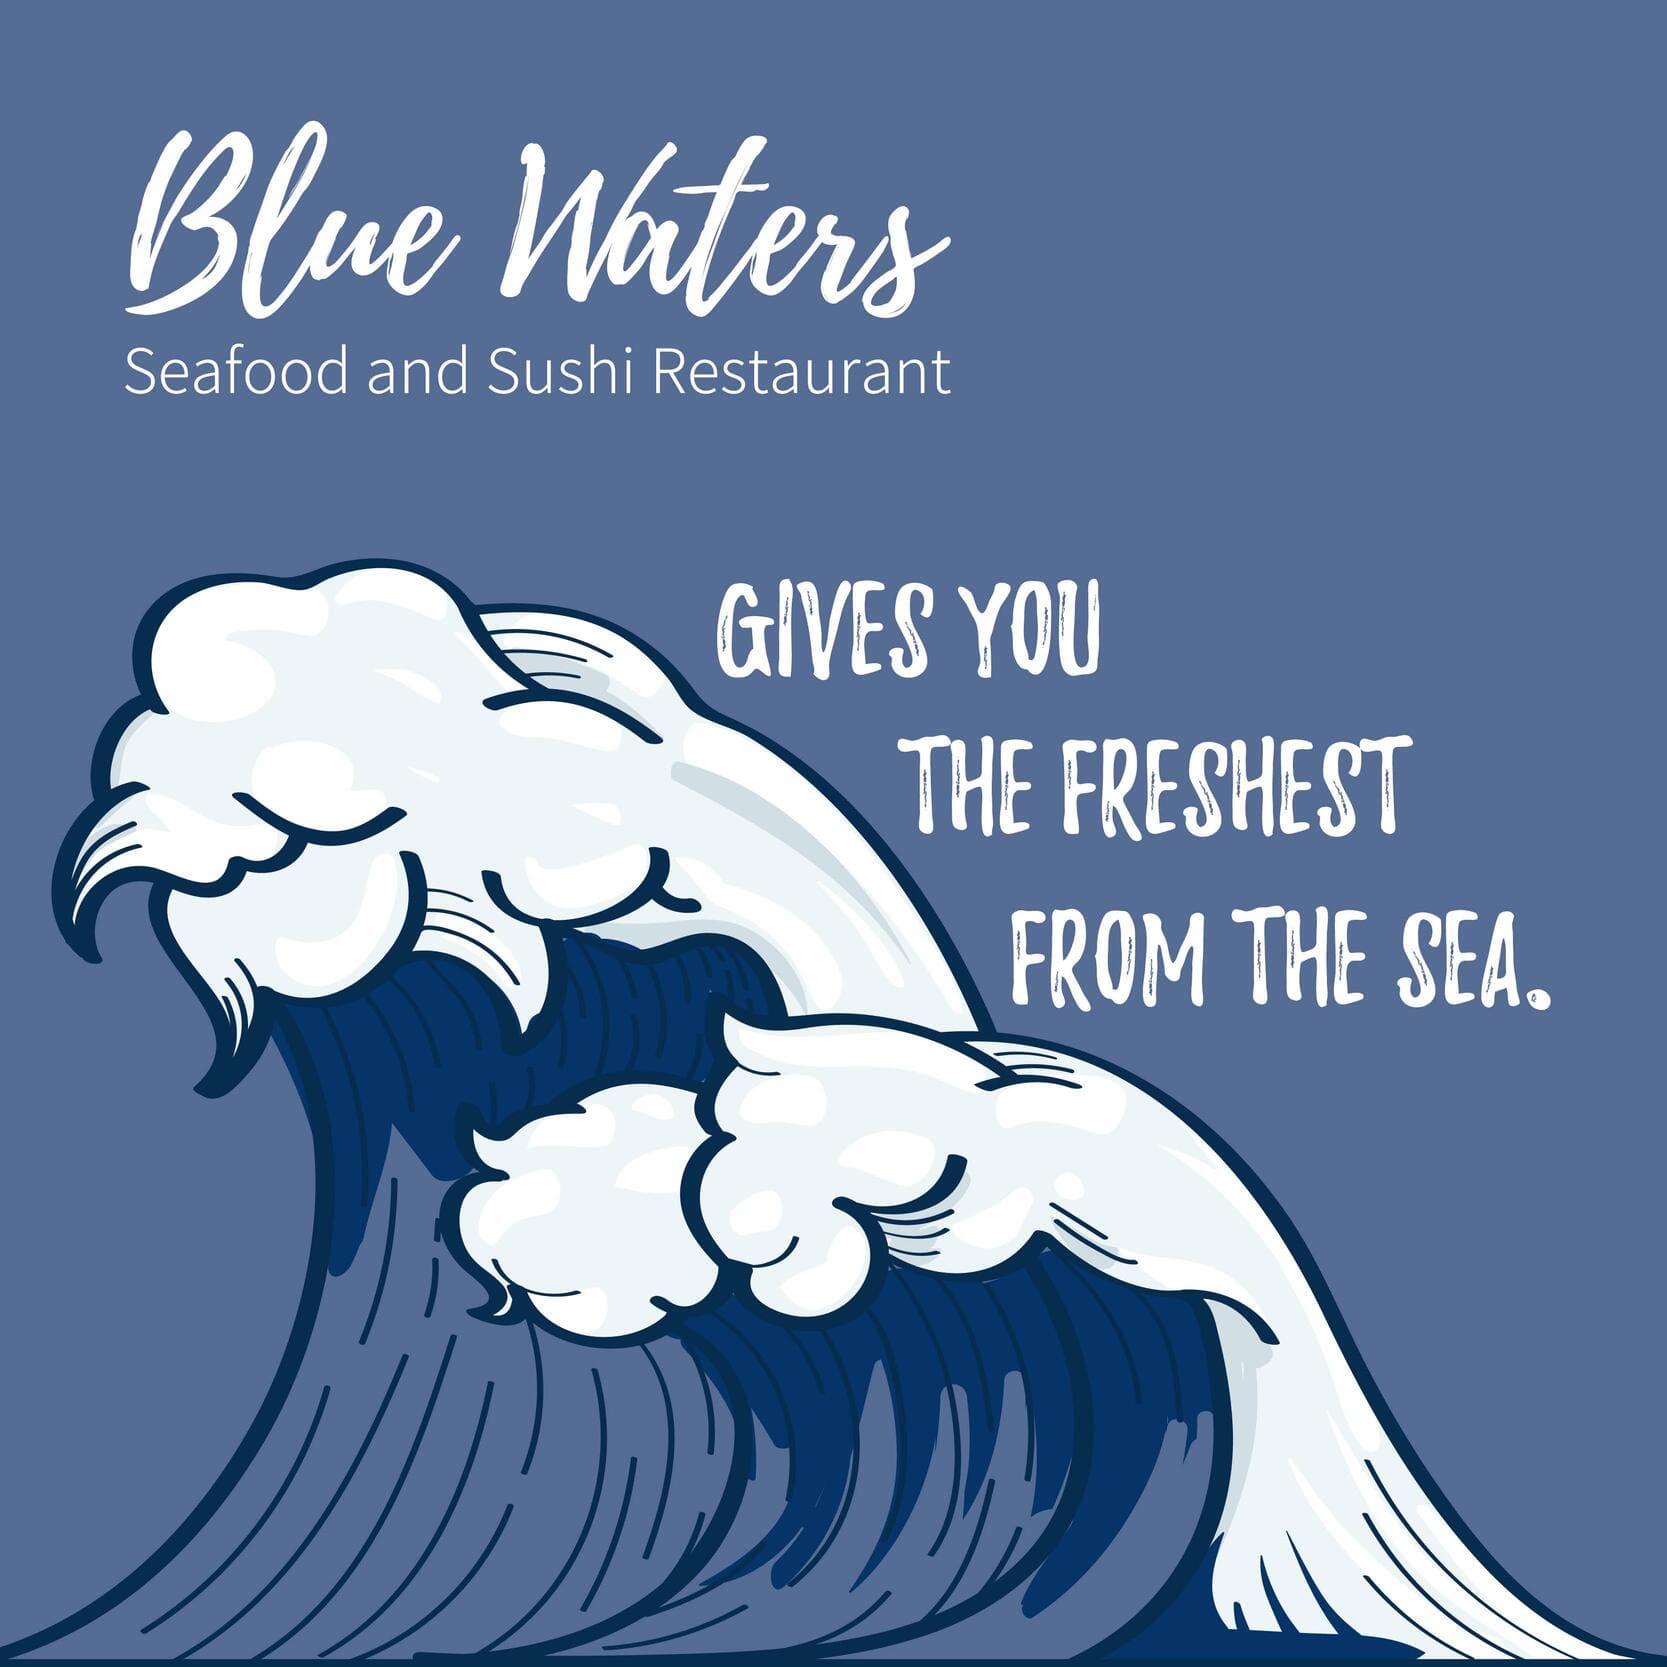 Custom Facebook post example from Blue Waters Restaurant